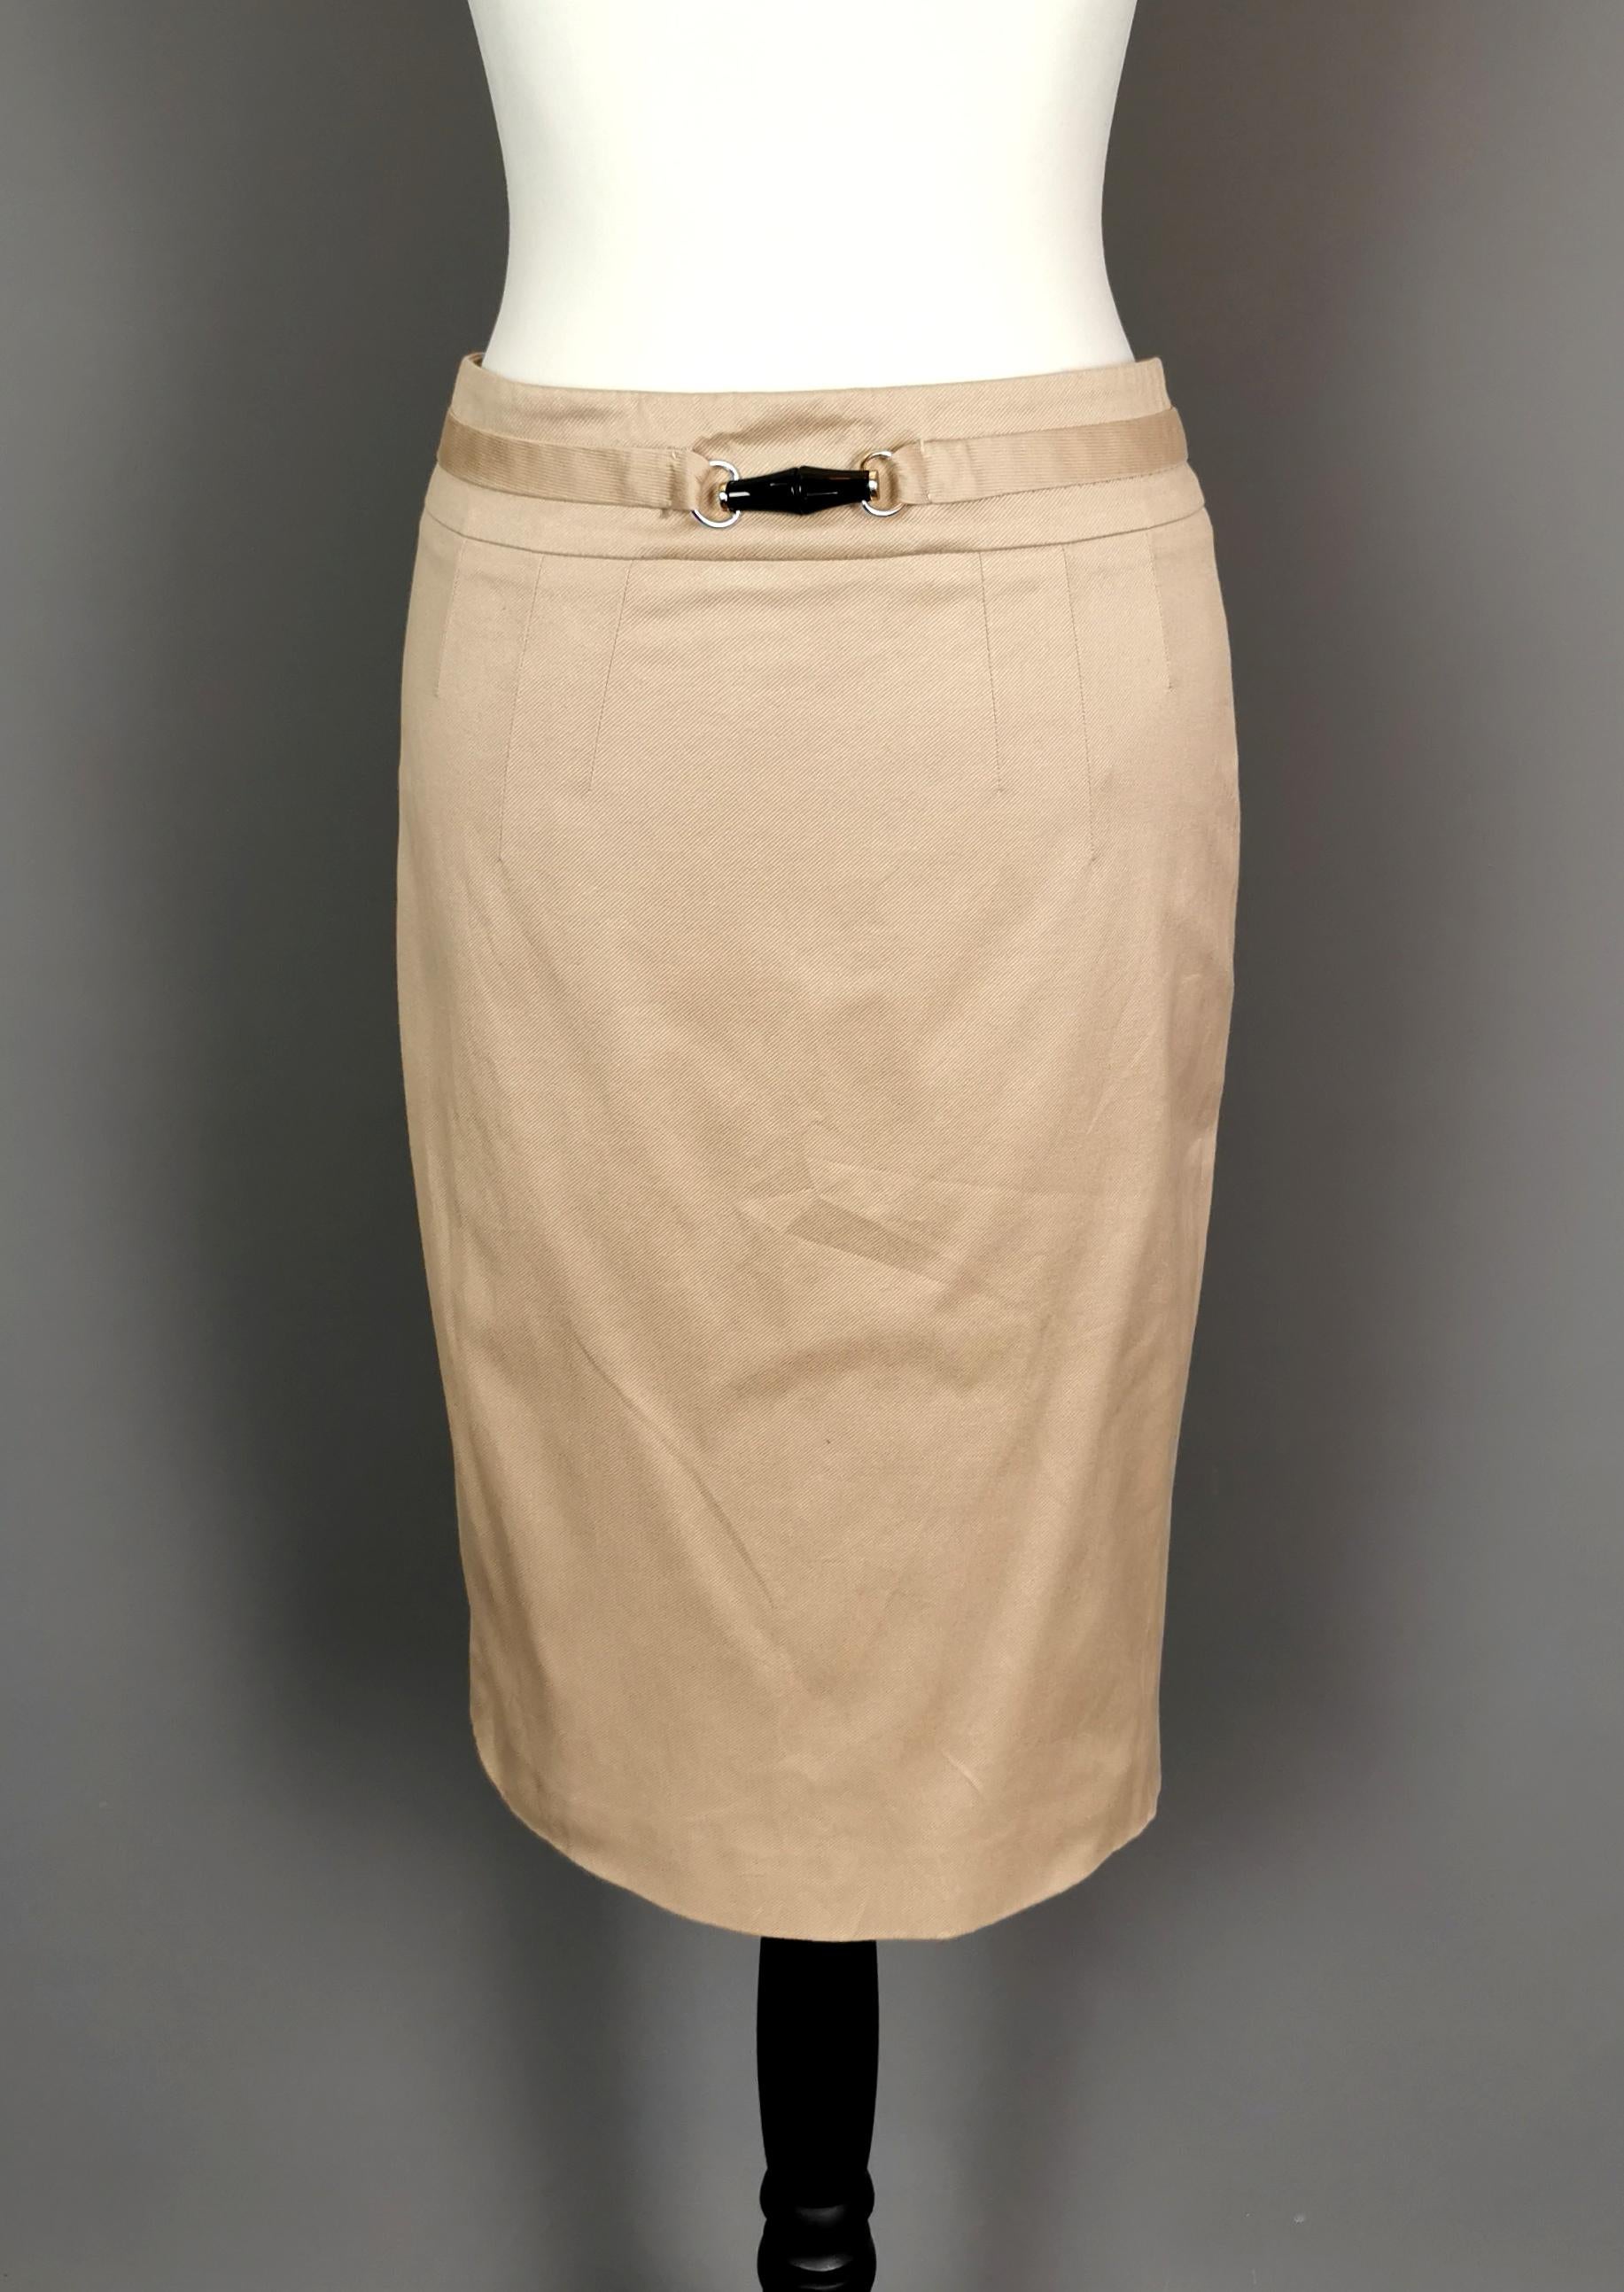 A stylish vintage Gucci, Tom Ford era pencil skirt.

It is made from a warm dark beige or sand colour with a bamboo trim at the waist in gold tone metal and black plastic.

The skirt has a split hem at the back and a pencil silhouette, perfect for